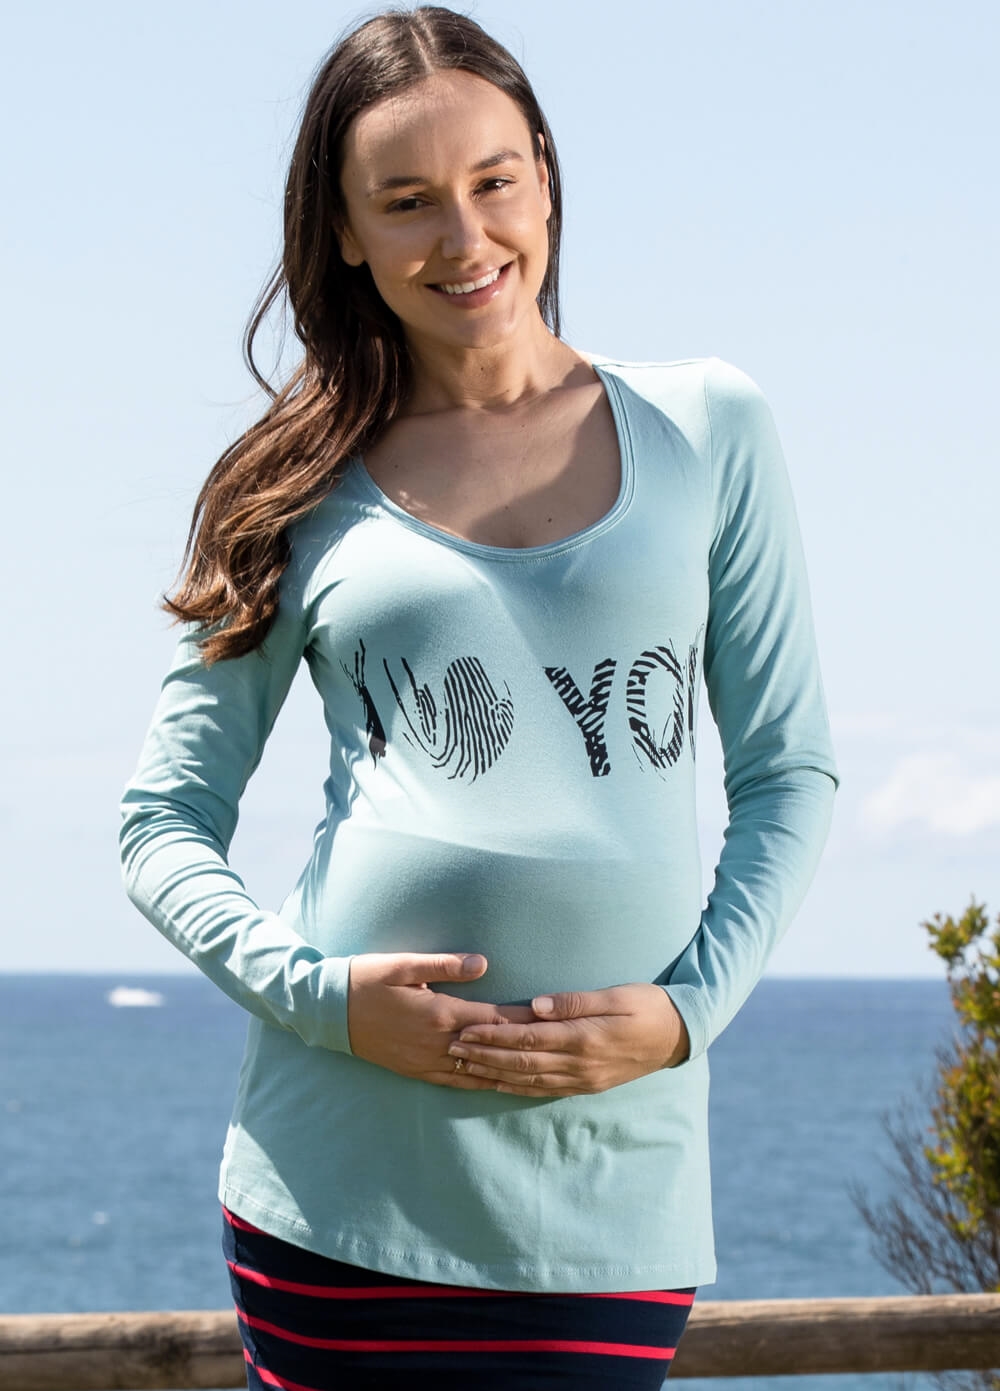 I Heart You Maternity Tee in Azul Blue by Esprit